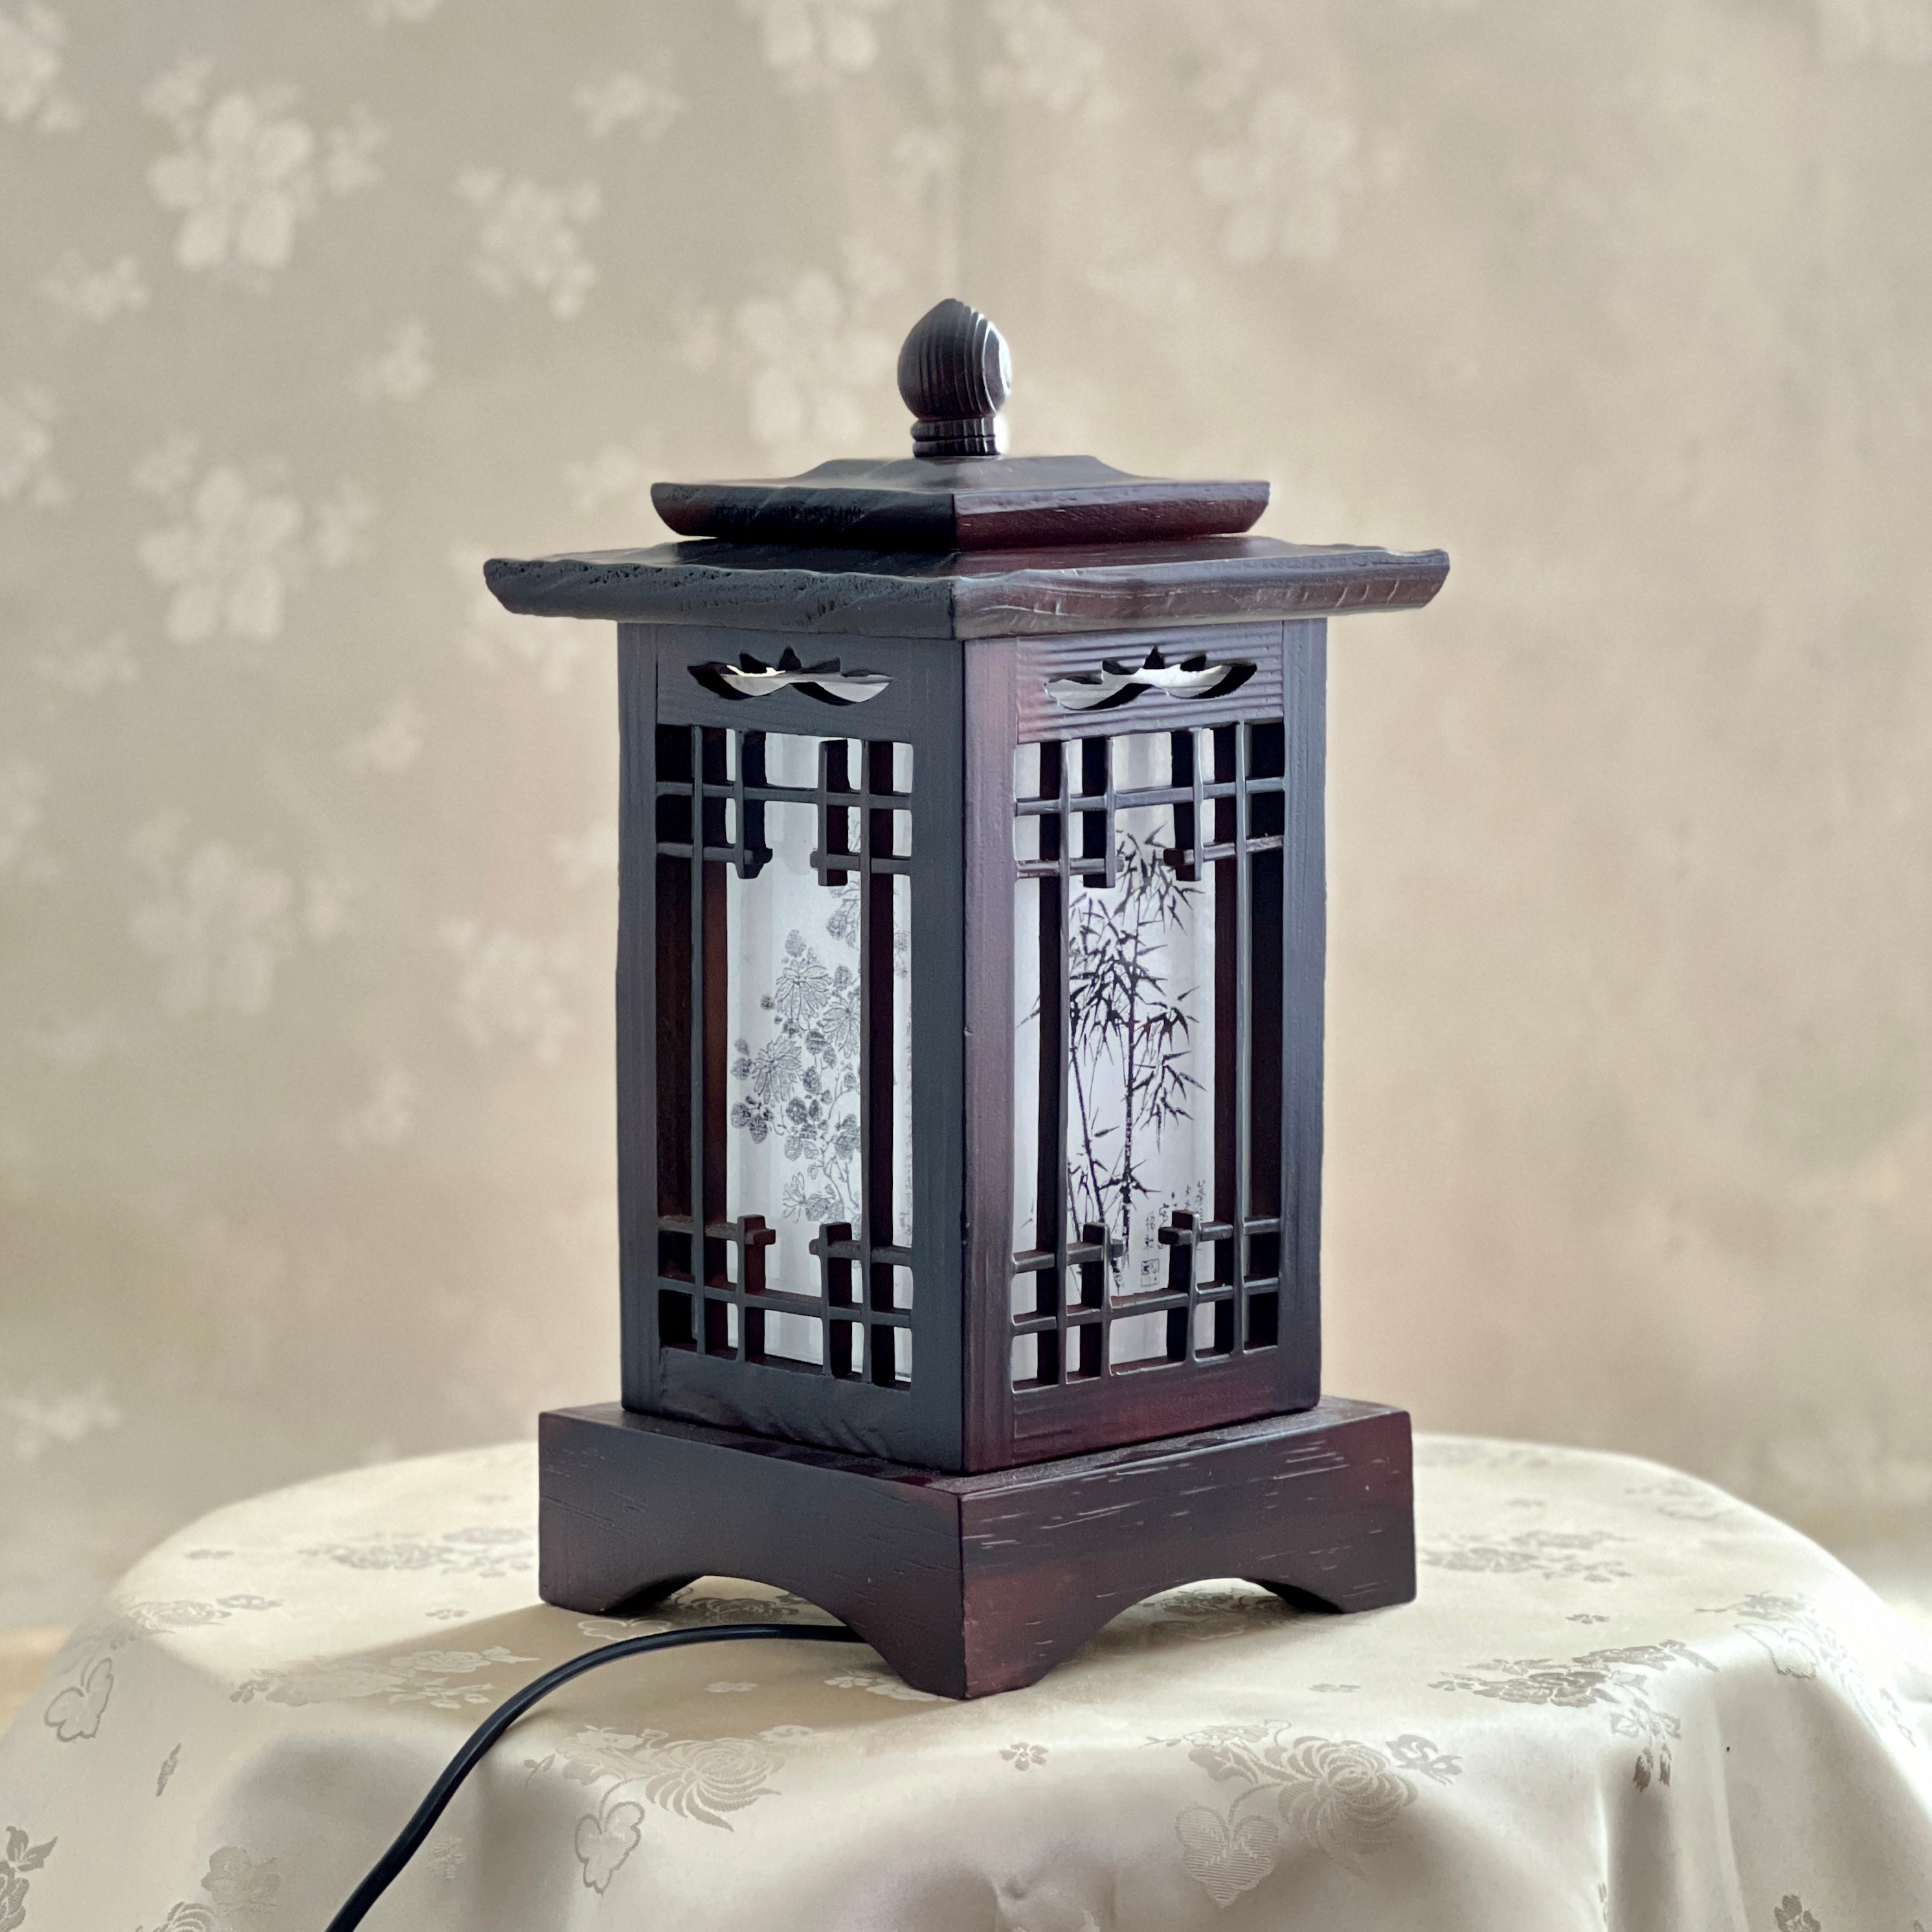 Front view of a handmade Korean traditional wooden table lamp with a square pagoda-shaped roof and Sagunja patterns.